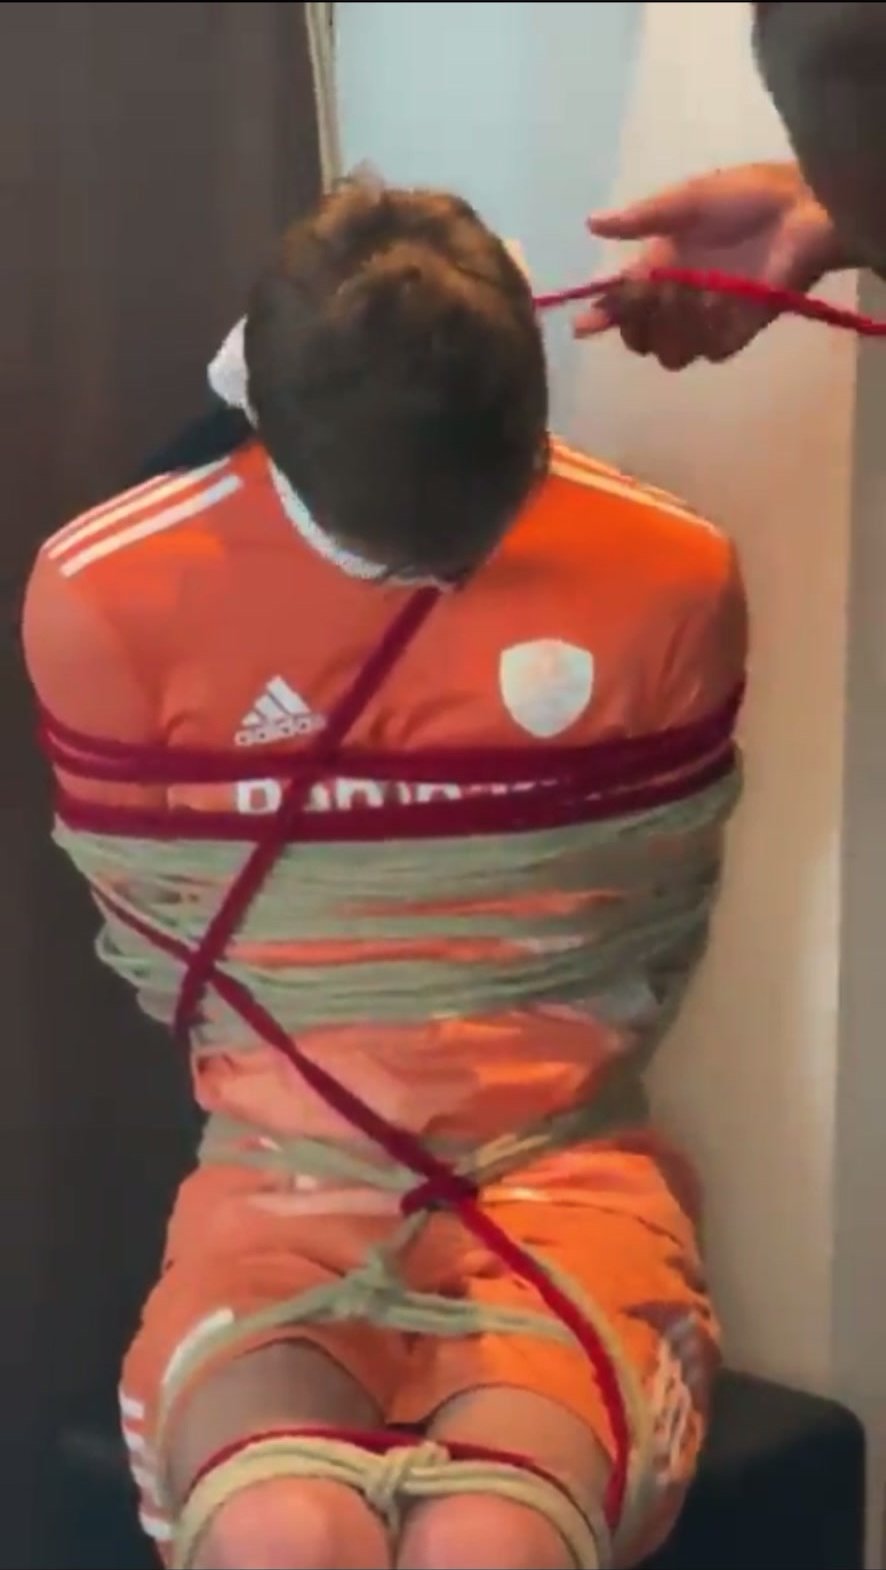 Soccer player ties up in hotel